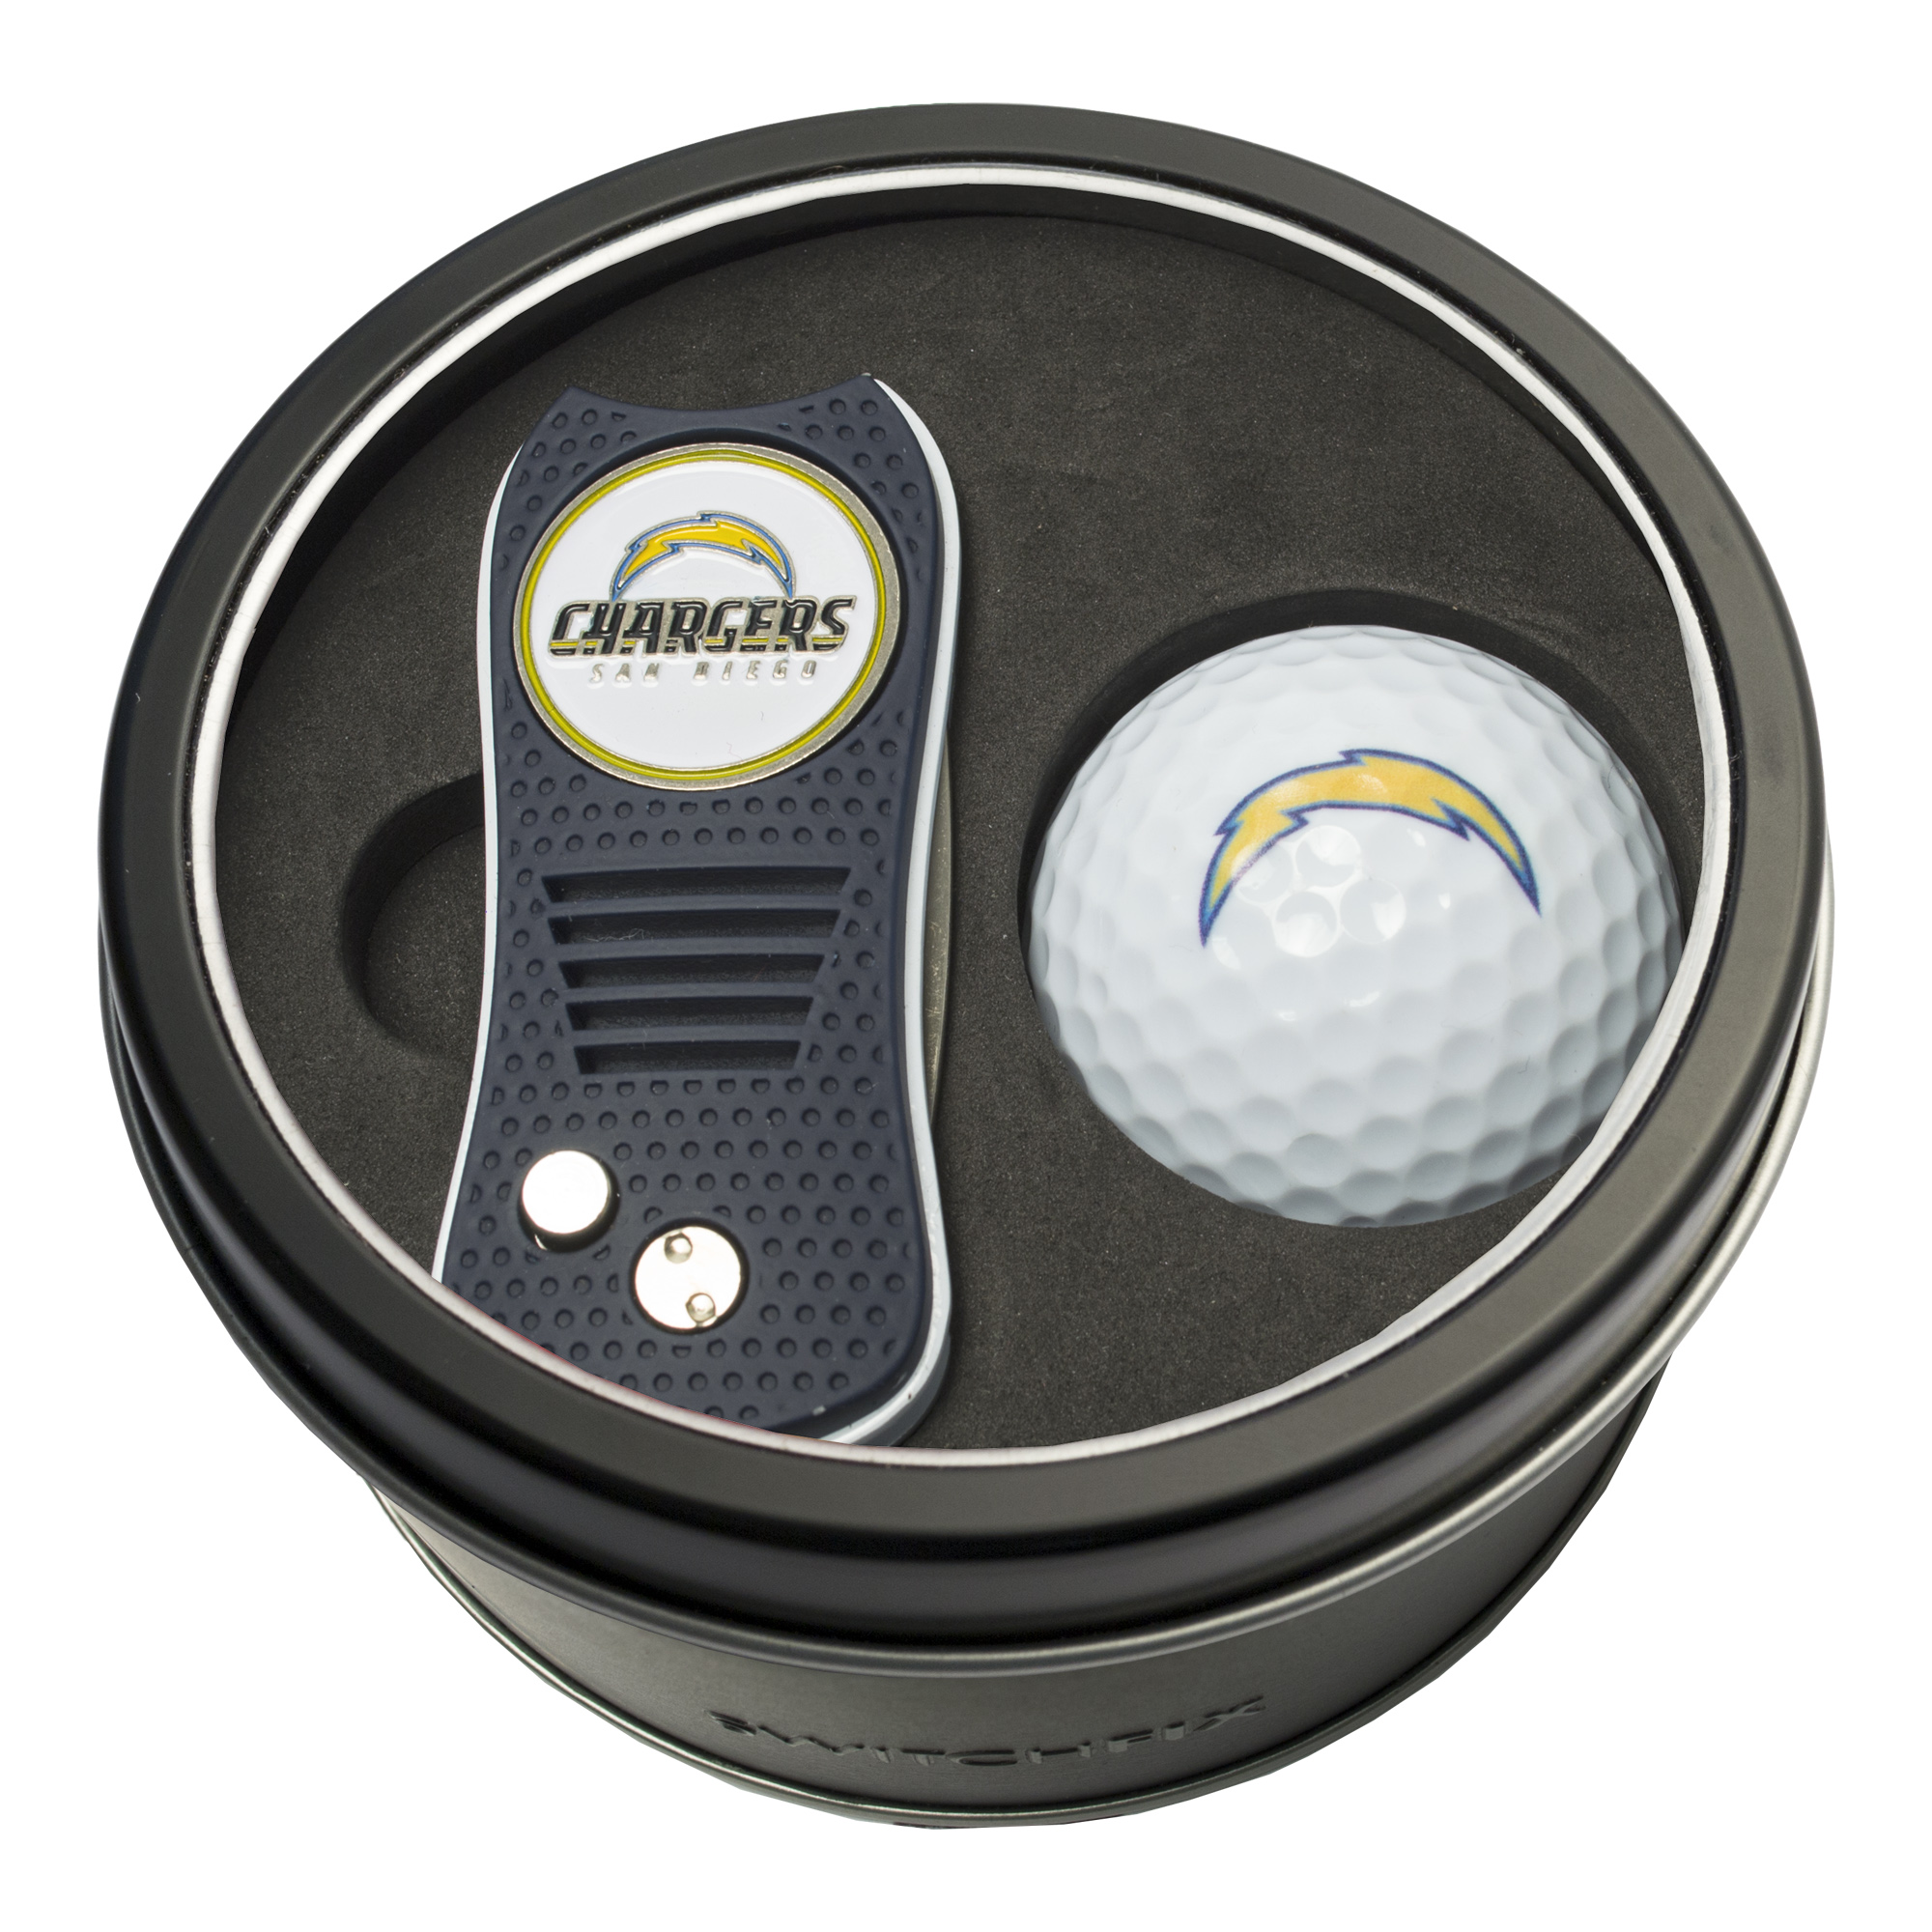 Los Angeles Chargers Switchfix + Golf Ball Tin Gift Set